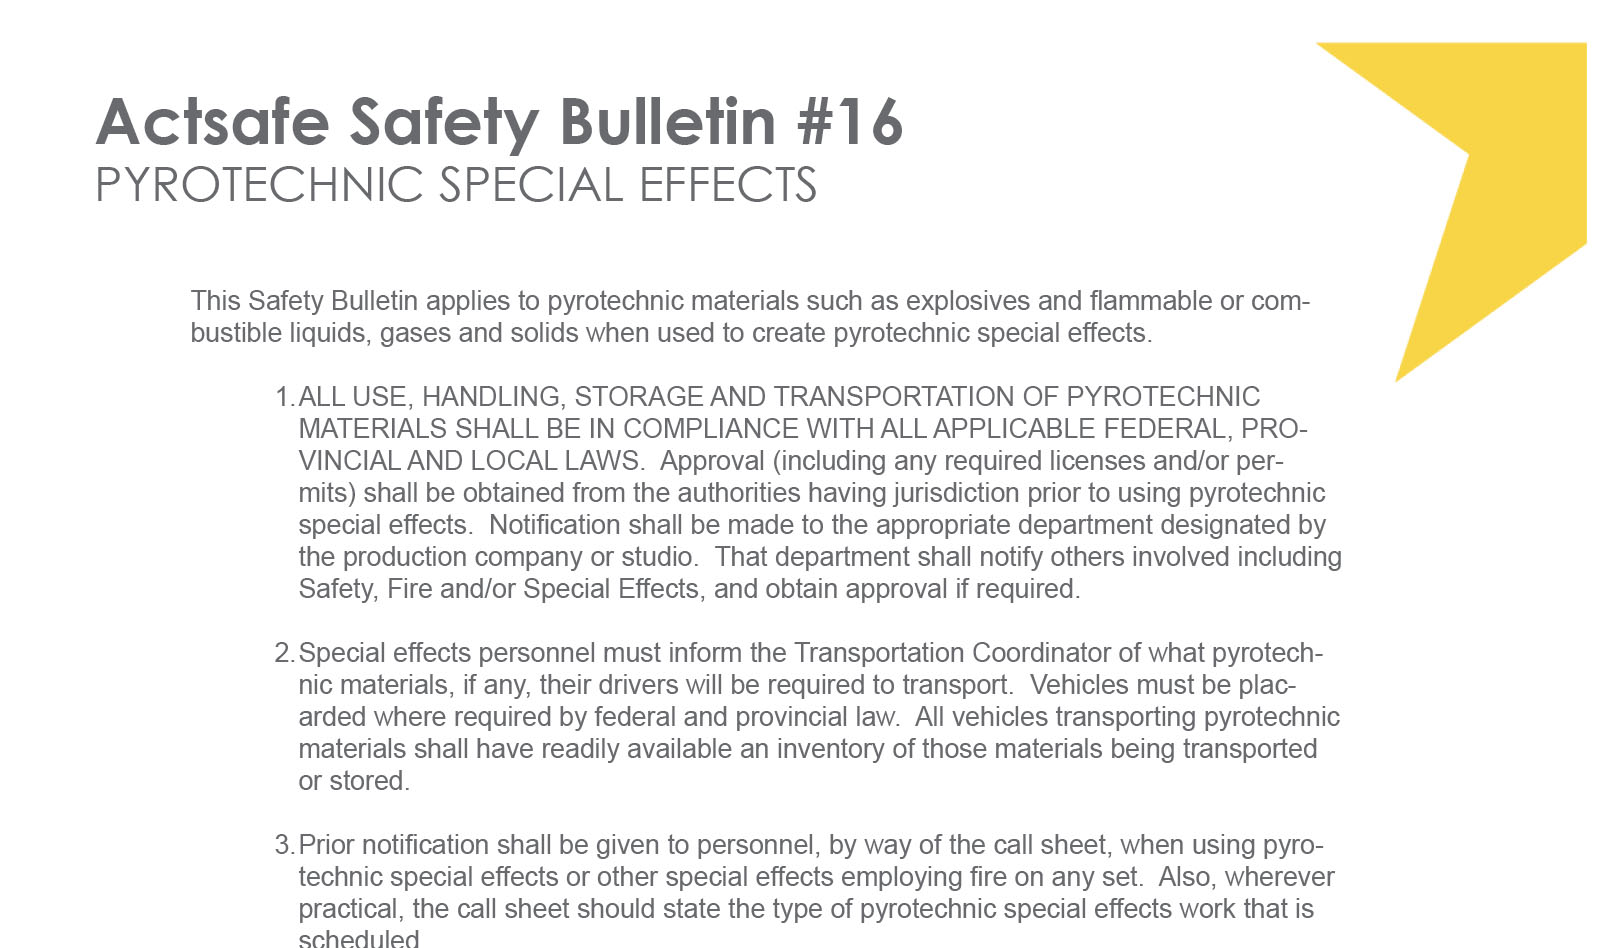 #16 Pyrotechnic Special Effects Motion Picture Safety Bulletin